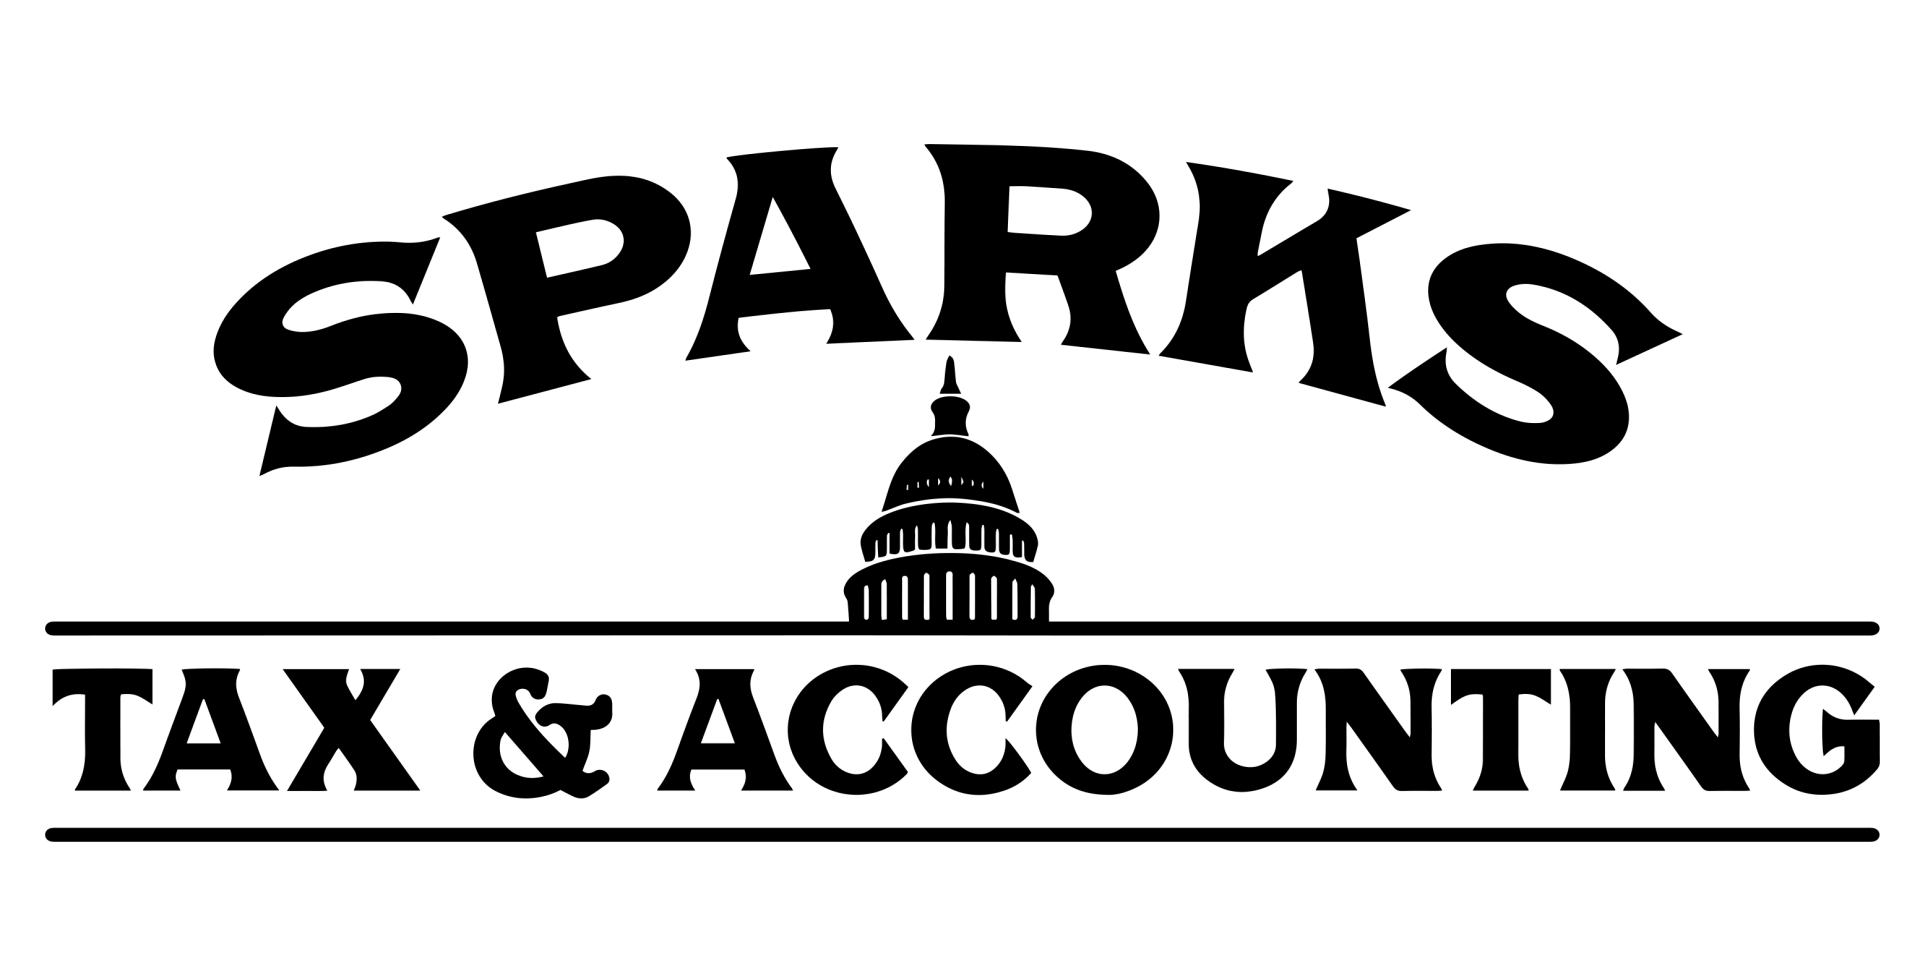 Sparks Tax and Accounting Services - logo